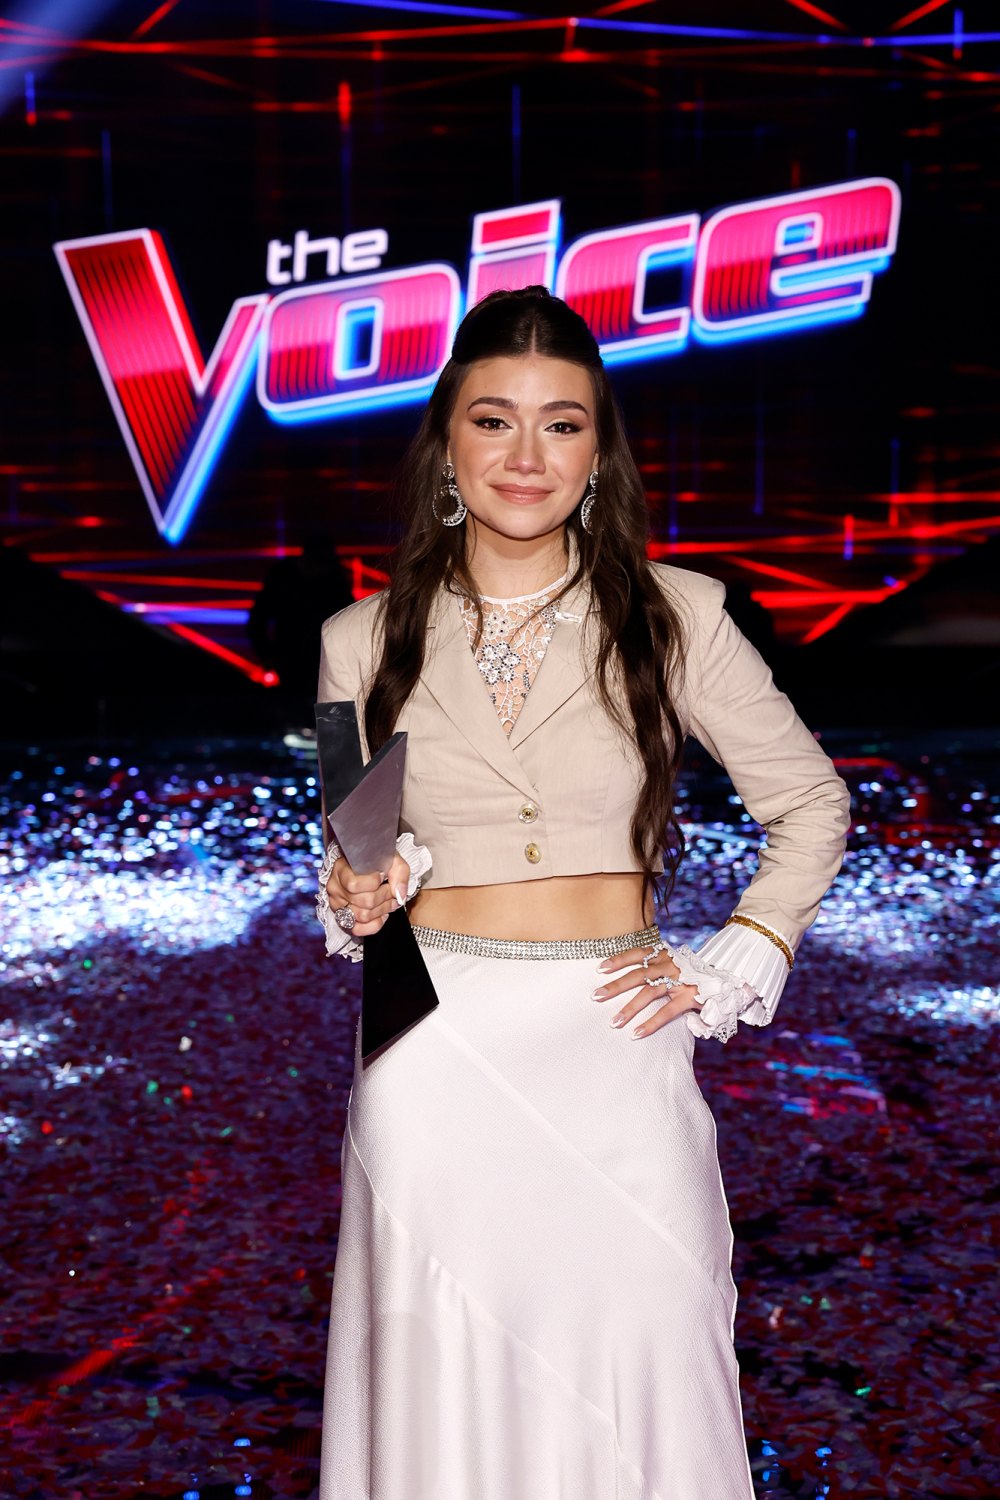 How Old is the Winner of the Voice 2023: Unveiling the Age of the Ultimate Champion